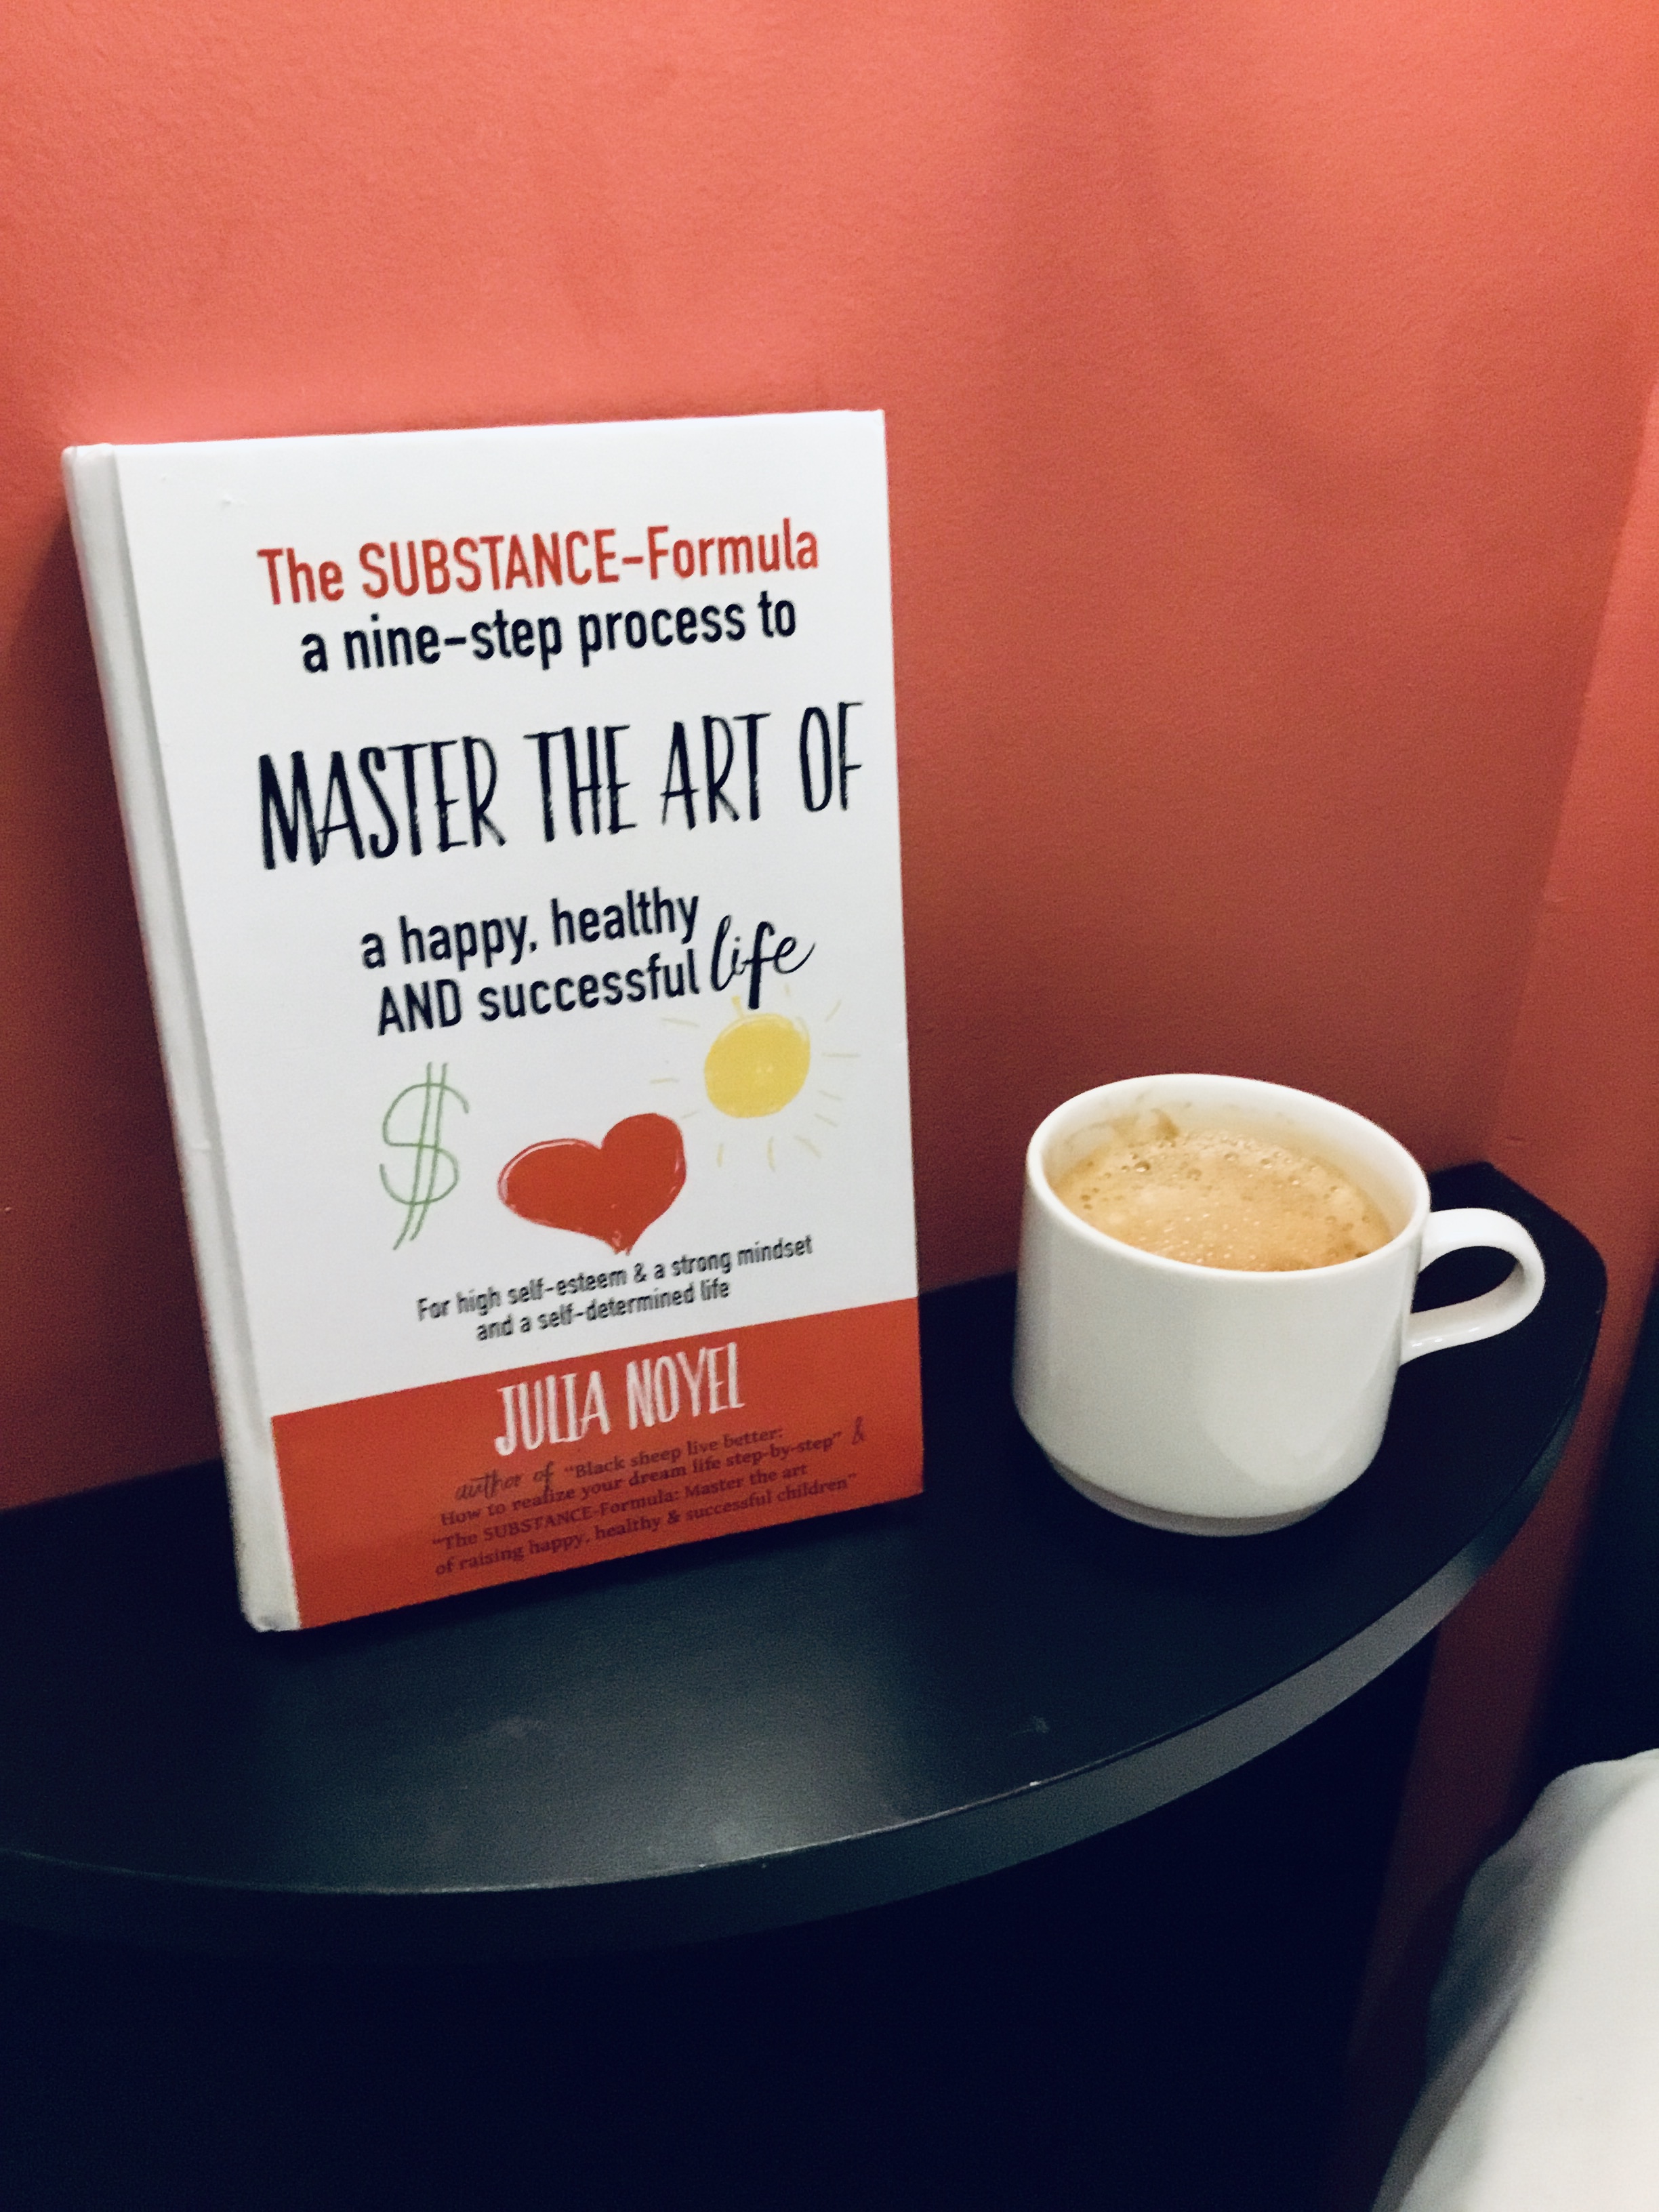 Book The Substance-Formula Master the Art of a happy, healthy AND successful Life